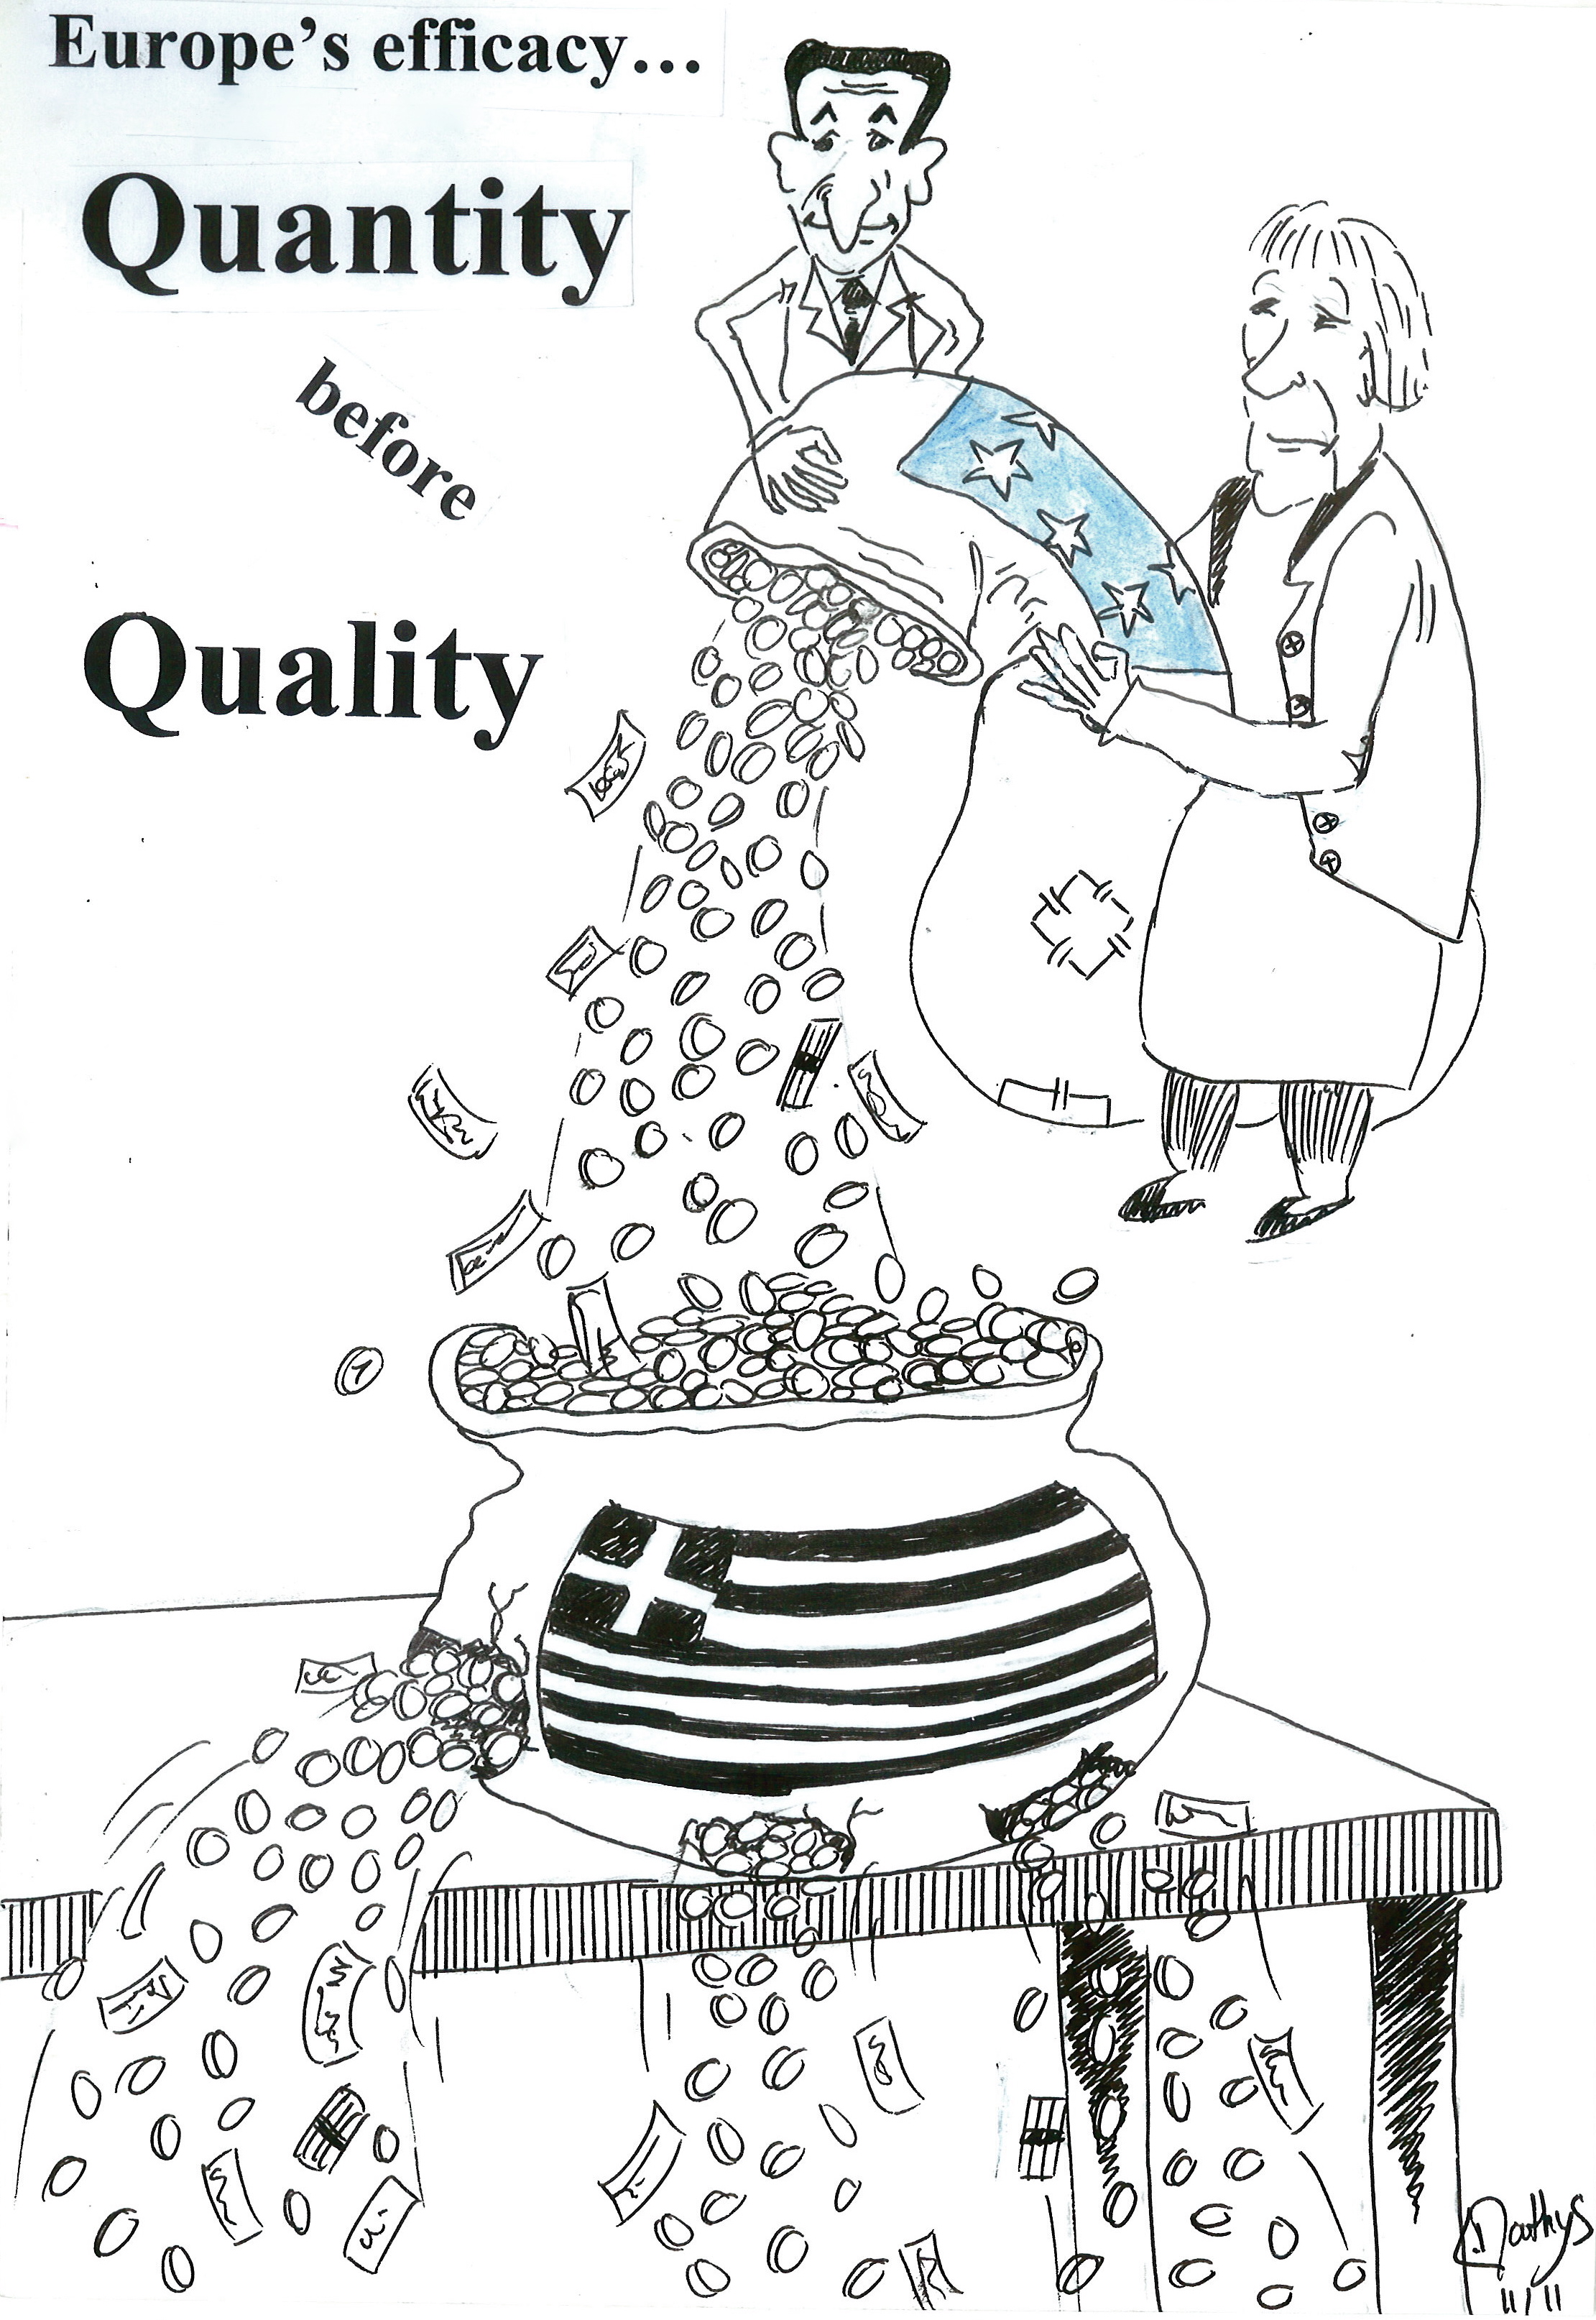 Europe’s efficacy: Quantity before Quality